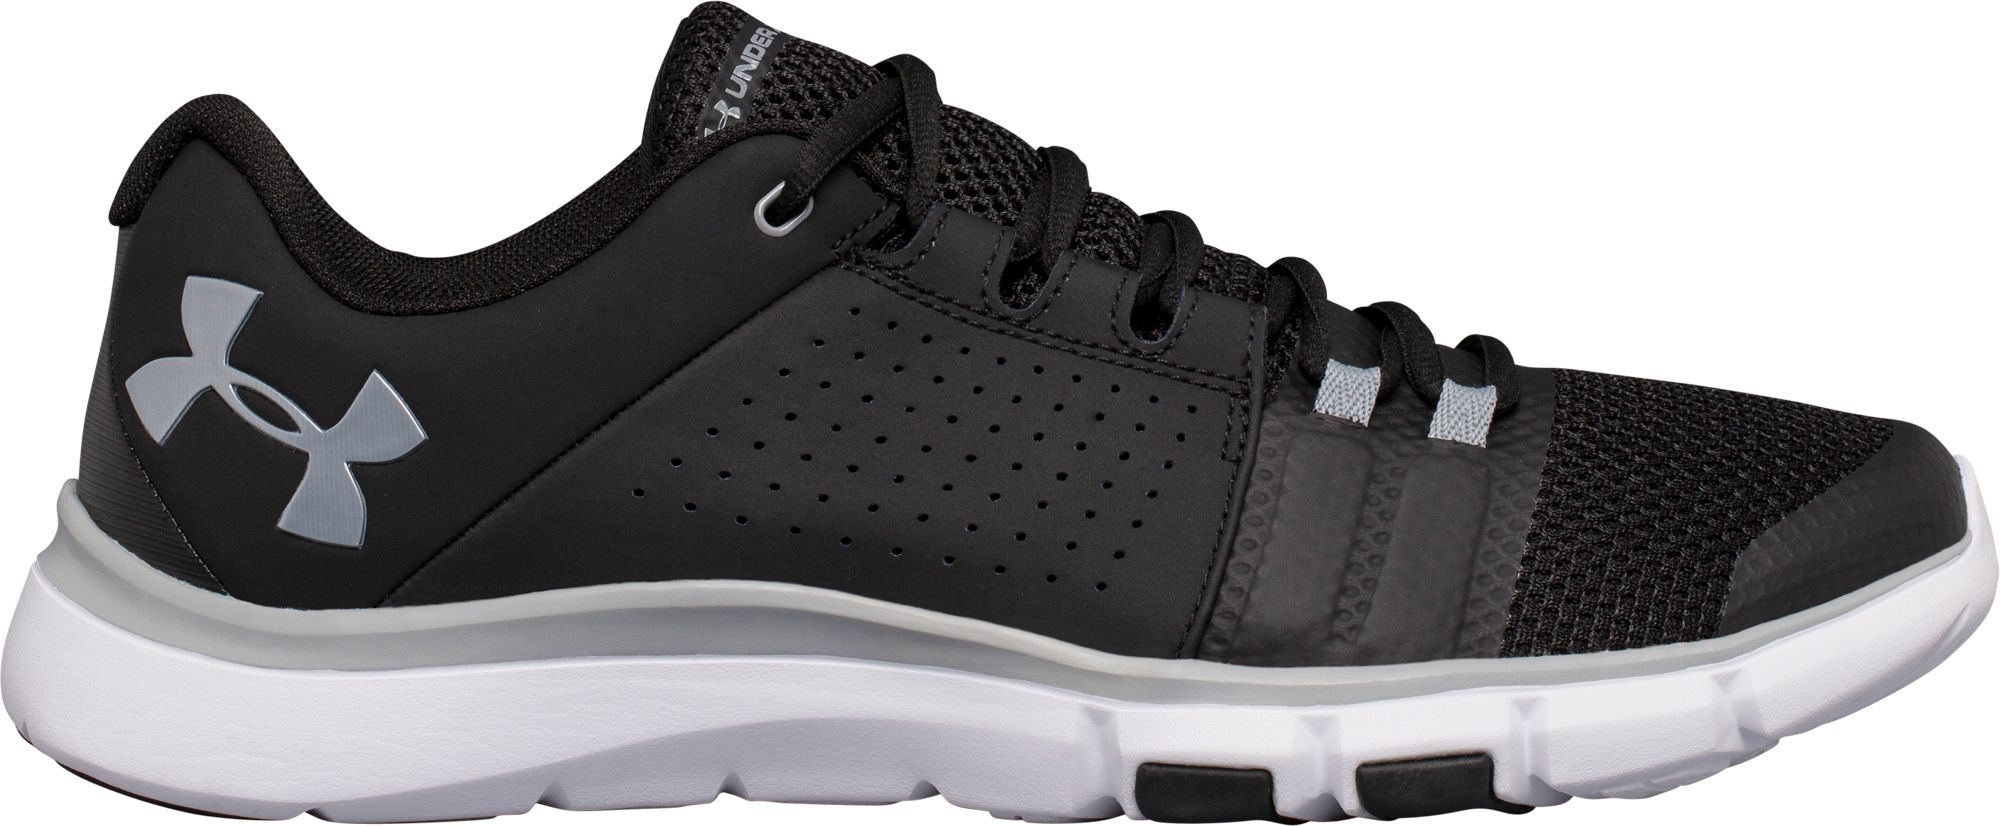 under armour mens training shoes